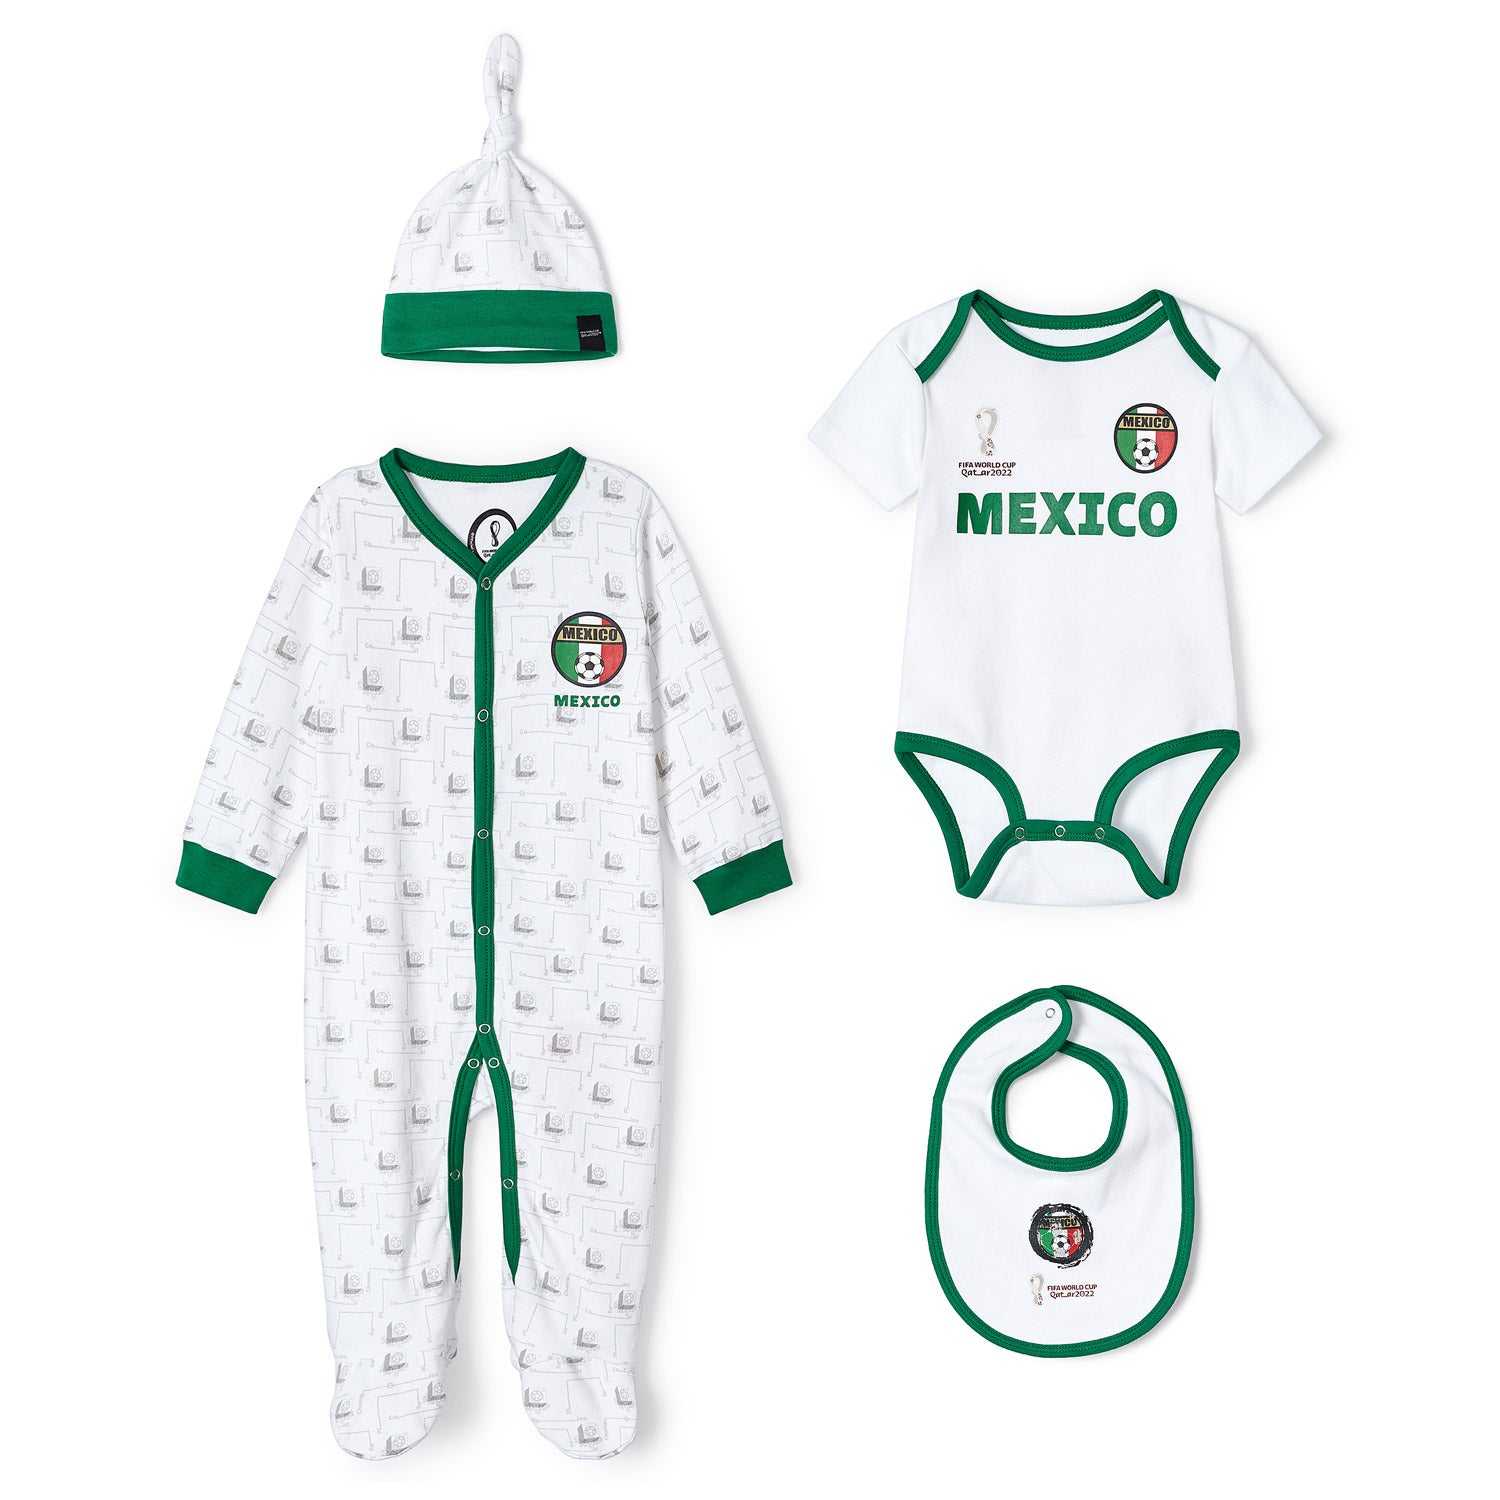 2022 World Cup Mexico White Romper - Infant/Toddler